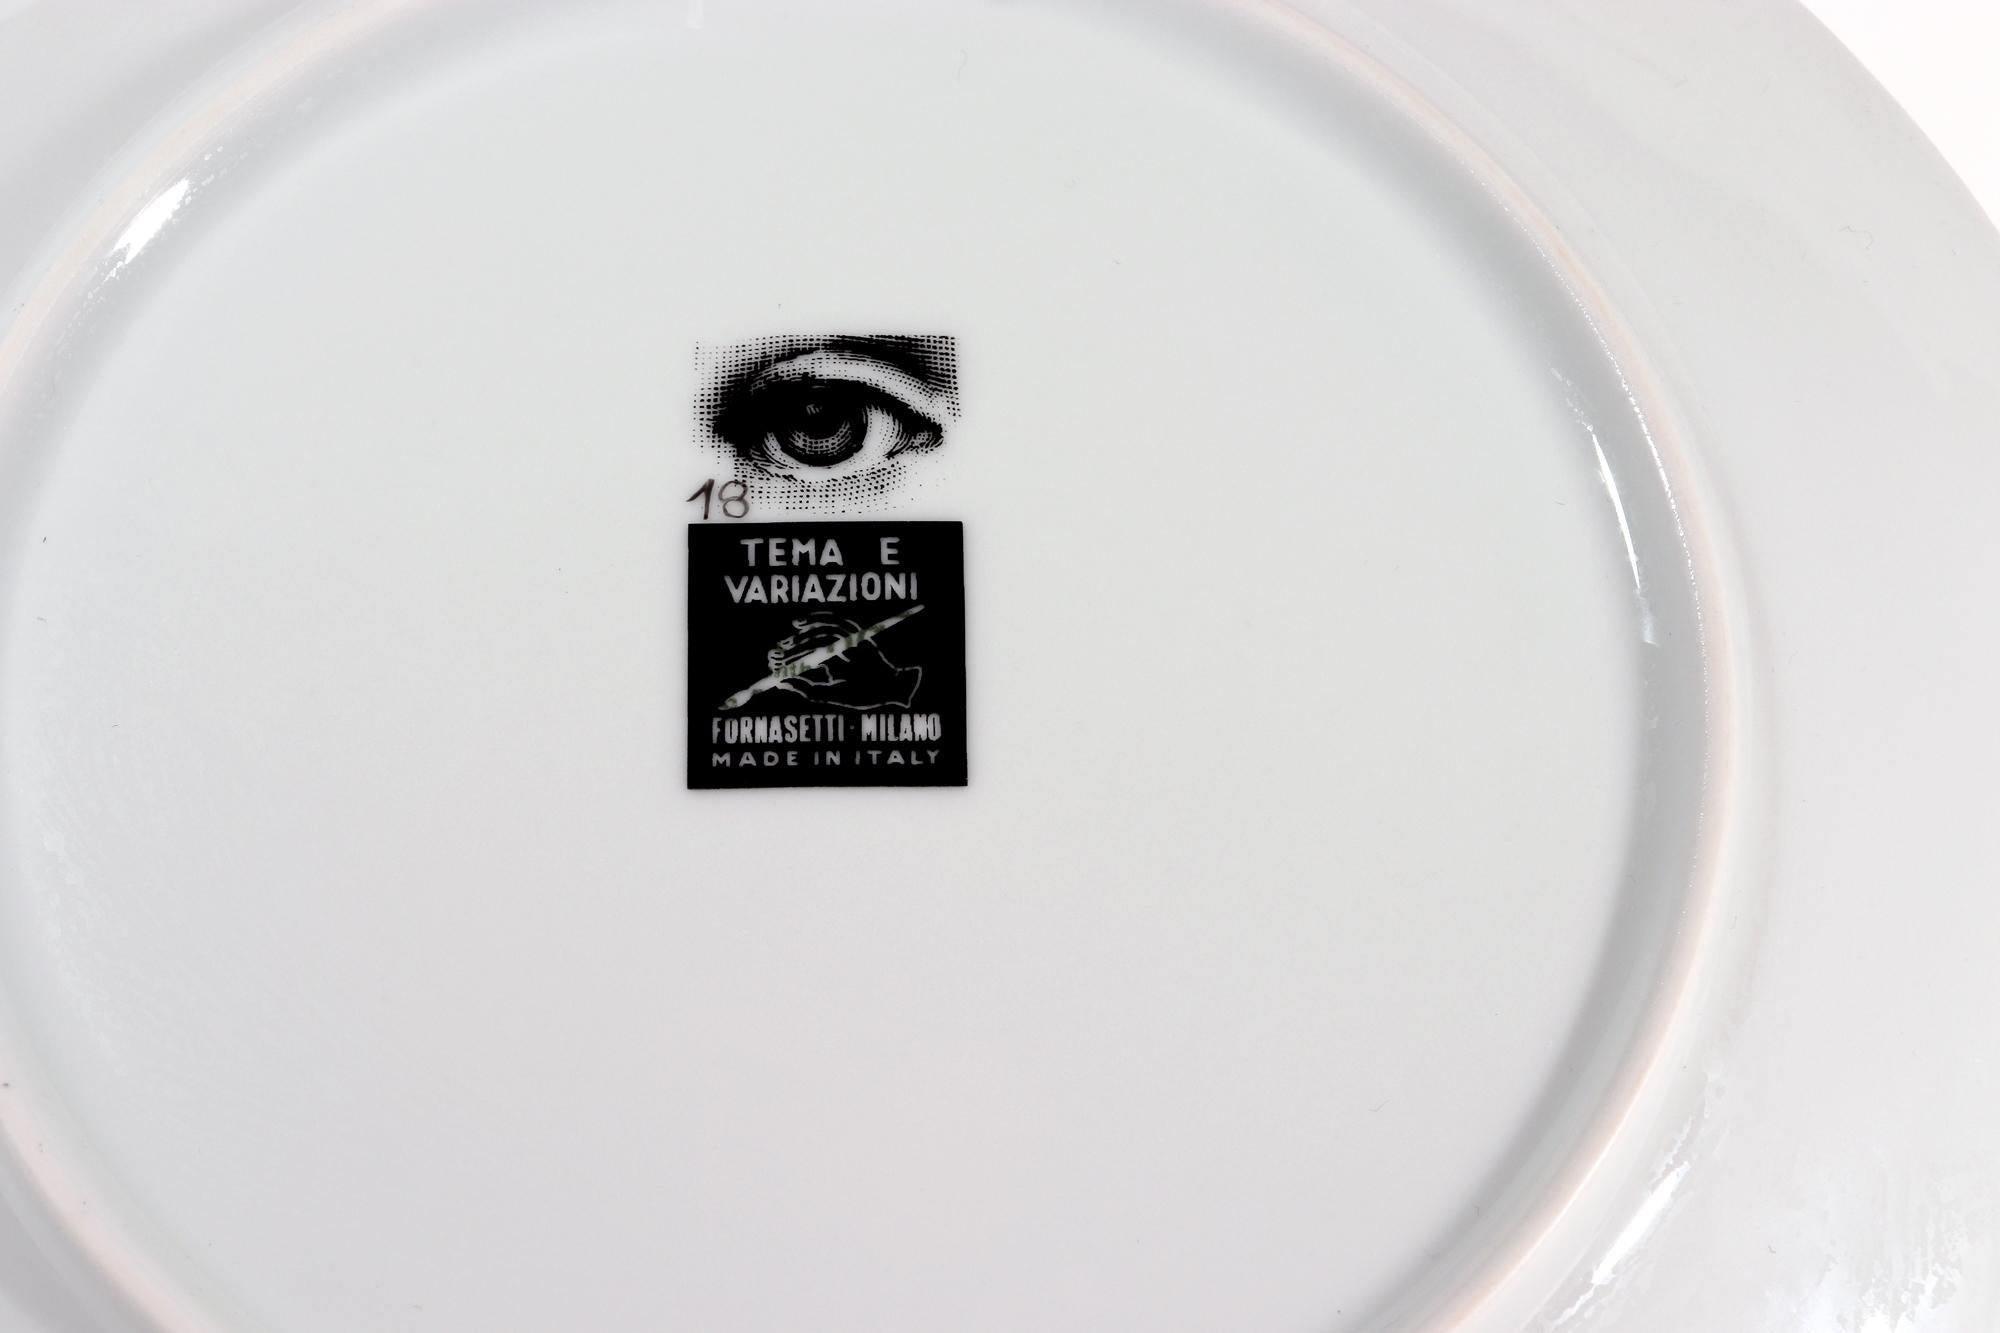 Contemporary Fornasetti Surrealist Themes & Variations Plate, #18, Fornasetti, 